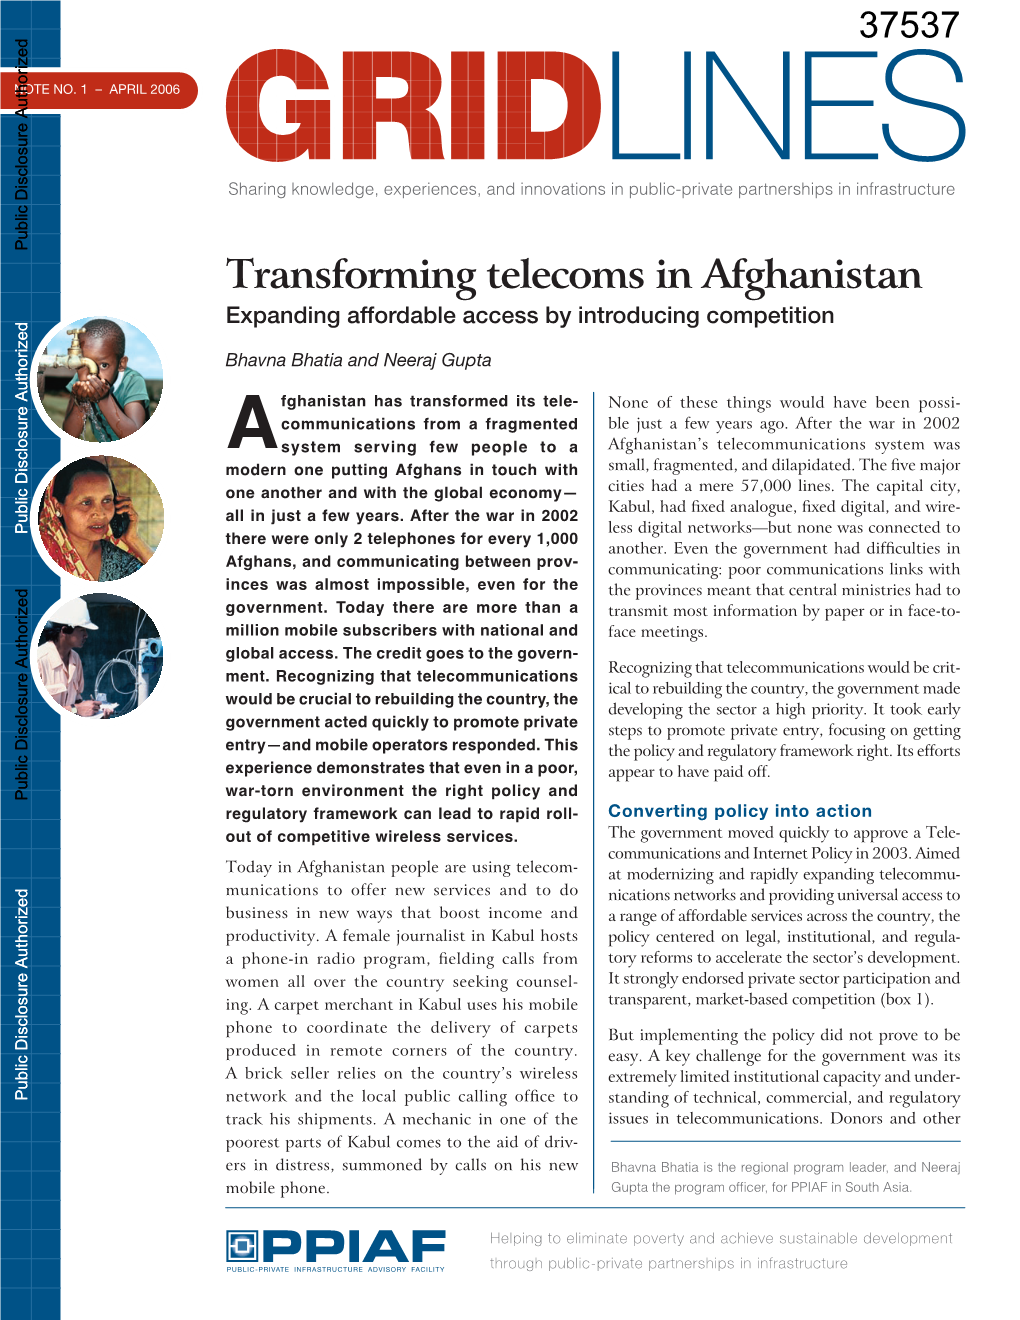 Transforming Telecoms in Afghanistan Expanding Affordable Access by Introducing Competition